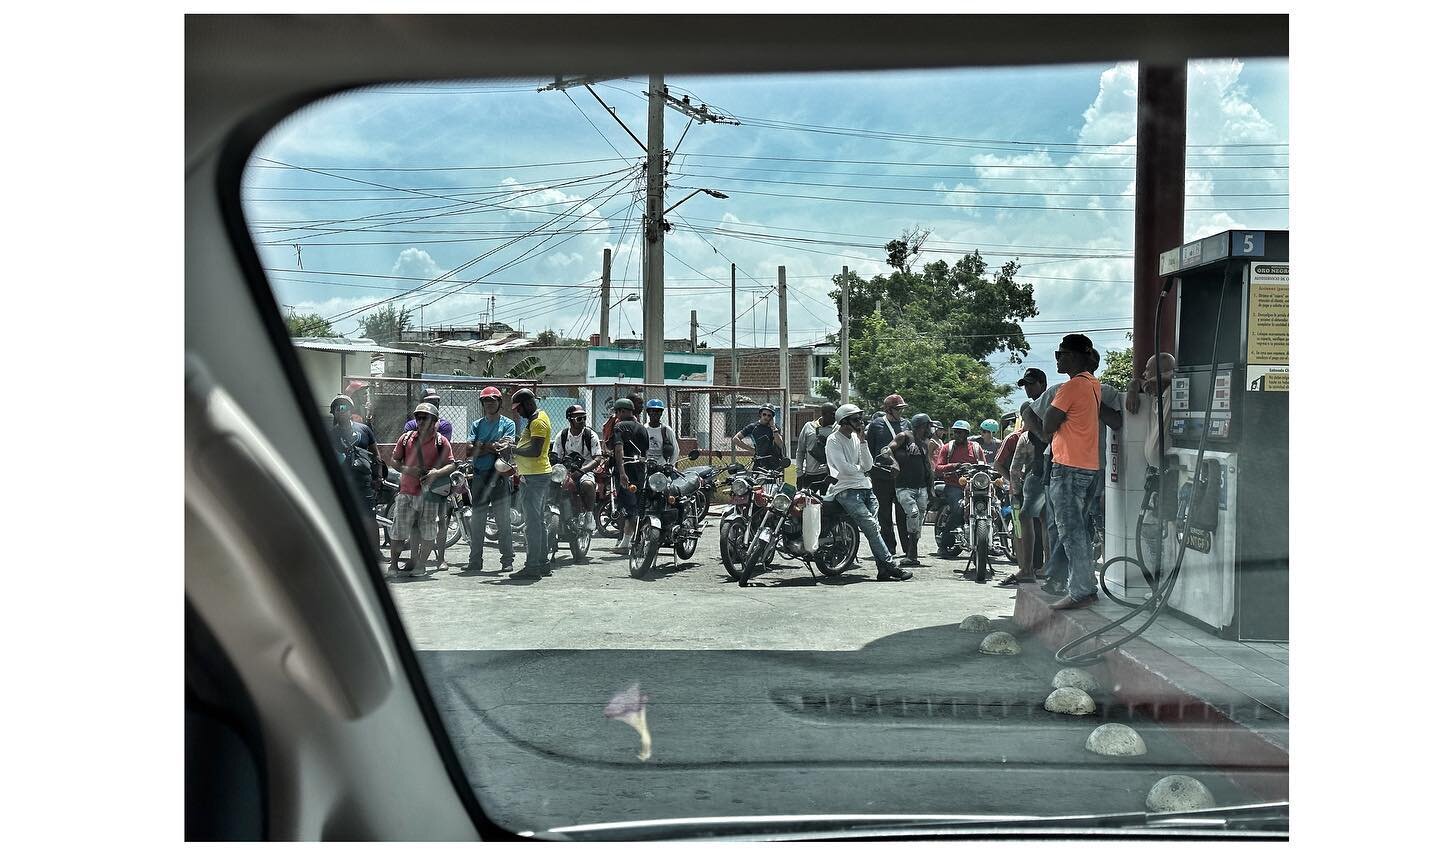 #outmywindow  finally got a tank of gas.  Used more gas getting gas. This is Cuba. The view never gets old as it&rsquo;s always the start of a new adventure.  Join me on a workshop www.cameraodysseys.com  We head to #cuba May 5th to join up with 3 US